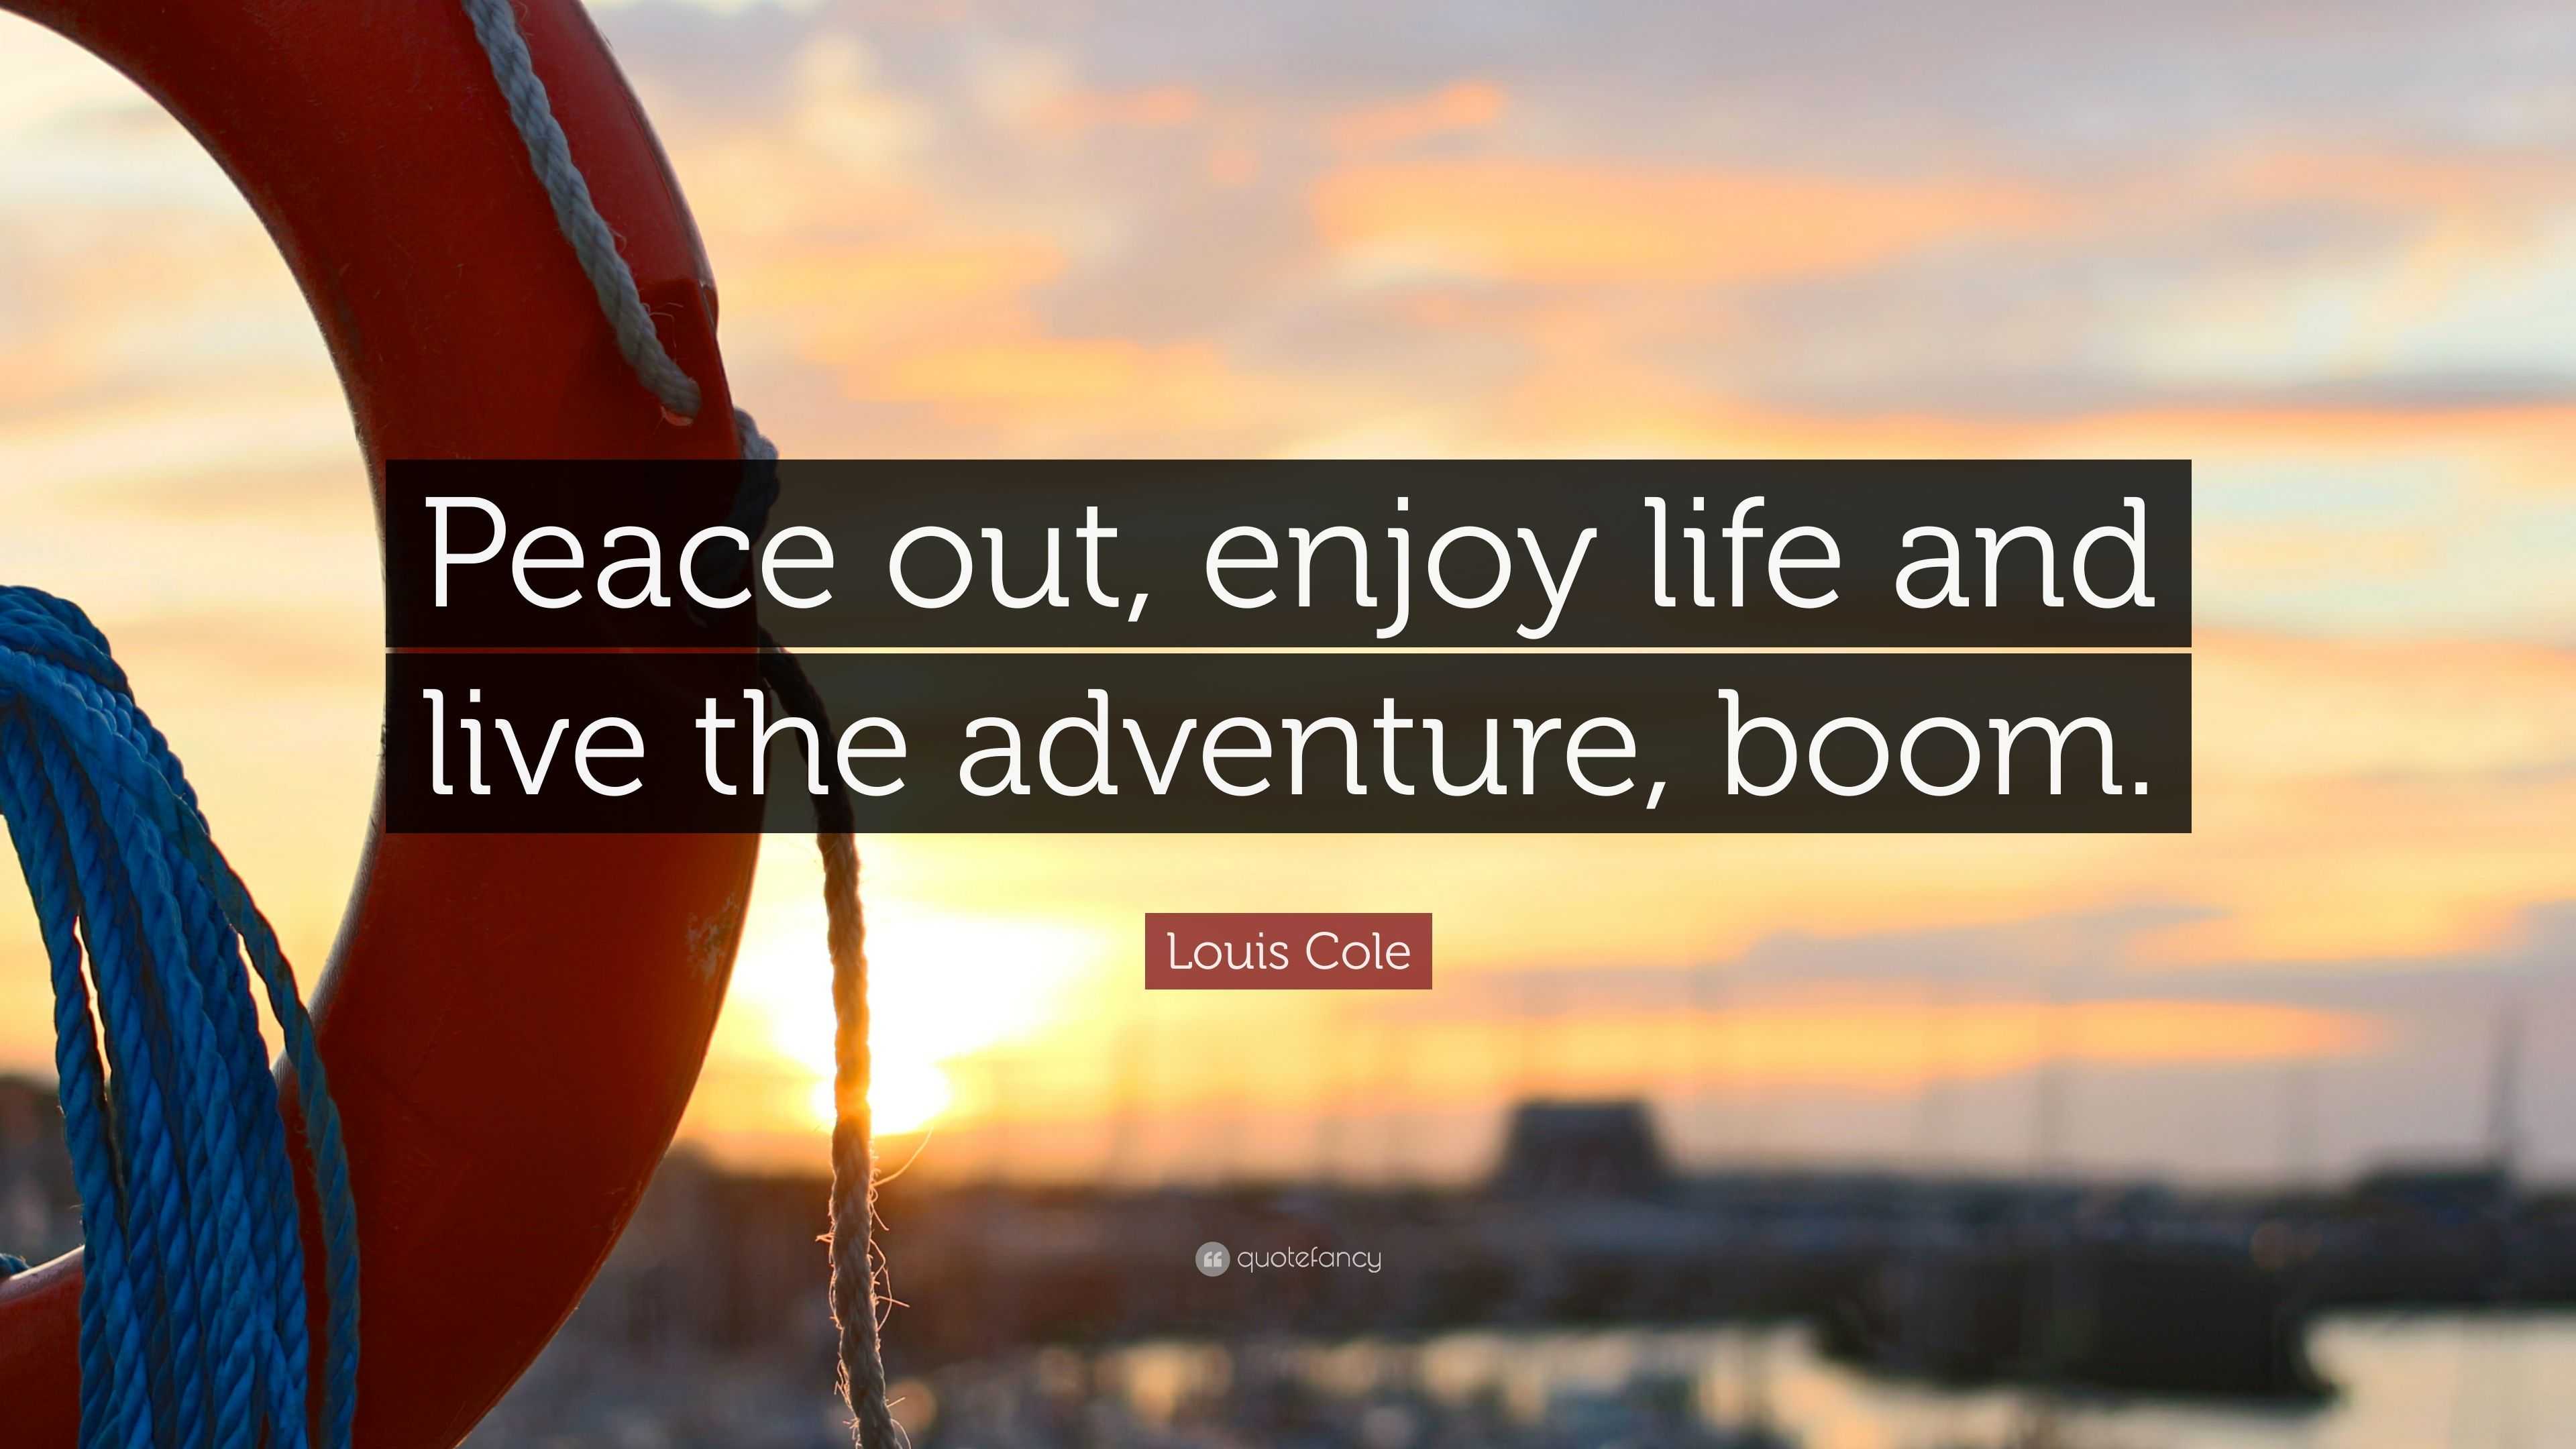 Louis Cole Quote: “Peace out, enjoy life and live the adventure, boom.” (9 wallpapers) - Quotefancy